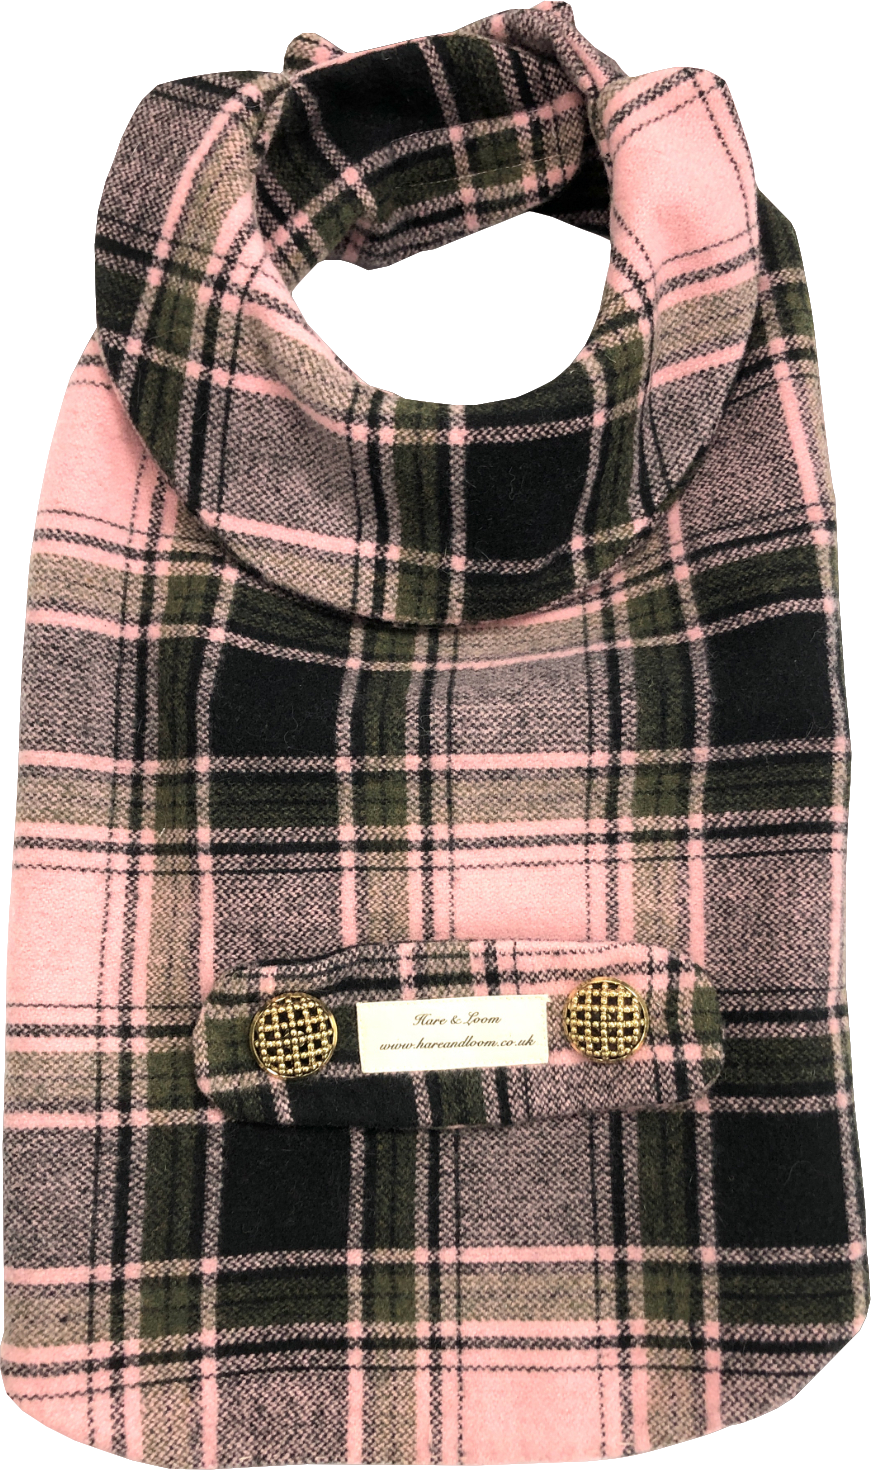 Hare & Loom Pink Checked Wool Dog Coat One Size